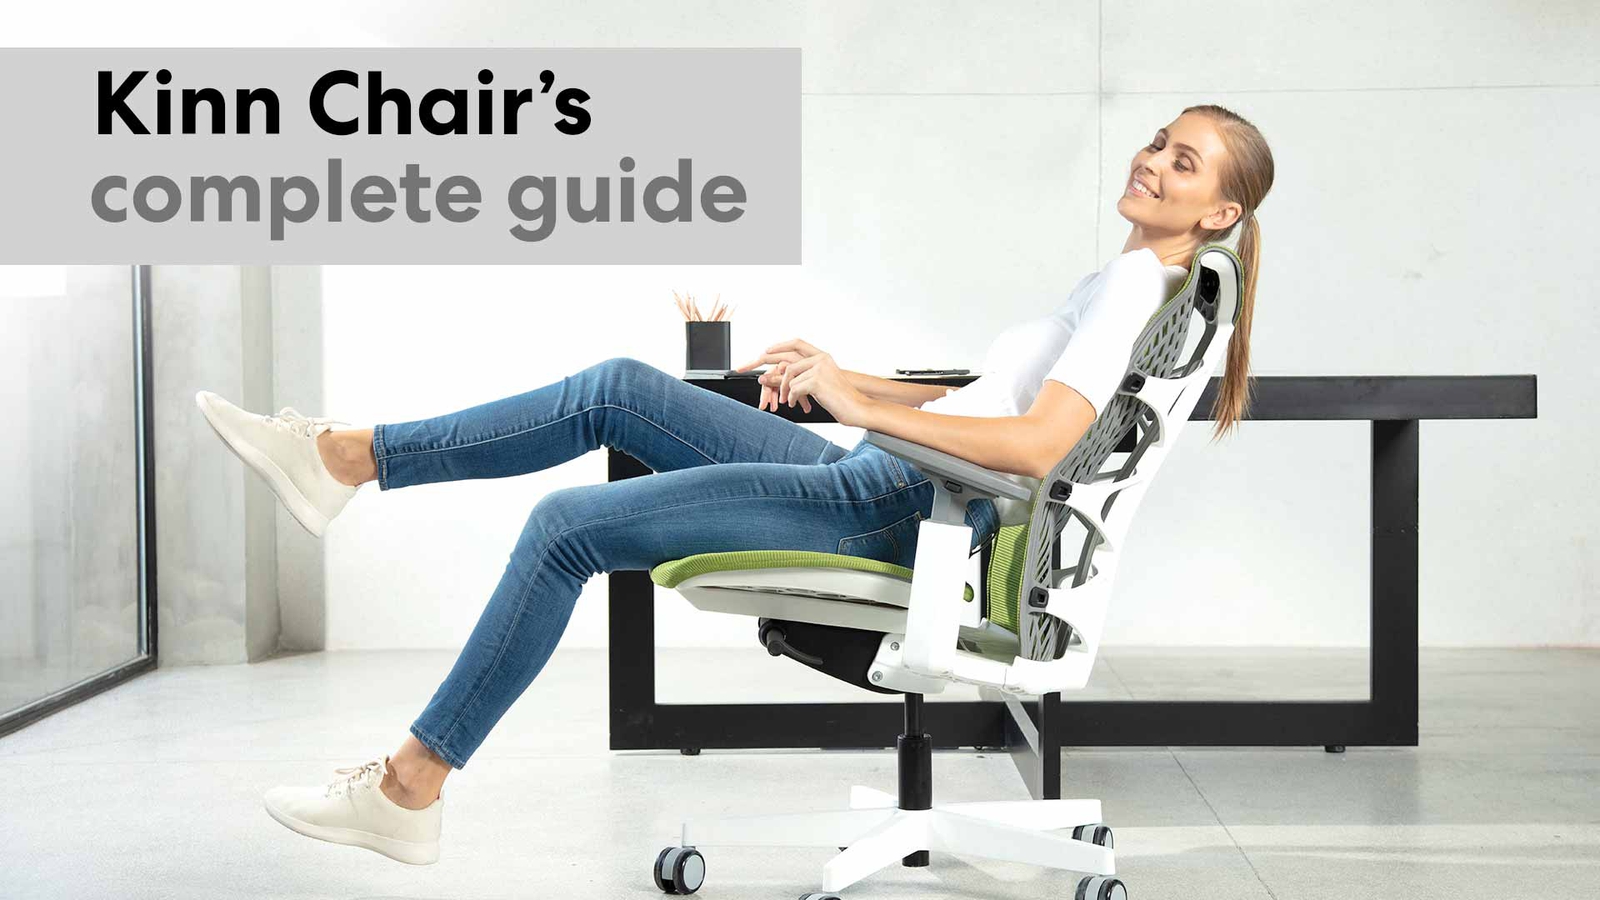 How to Use Your New ErgoChair Plus (Full Features Guide)